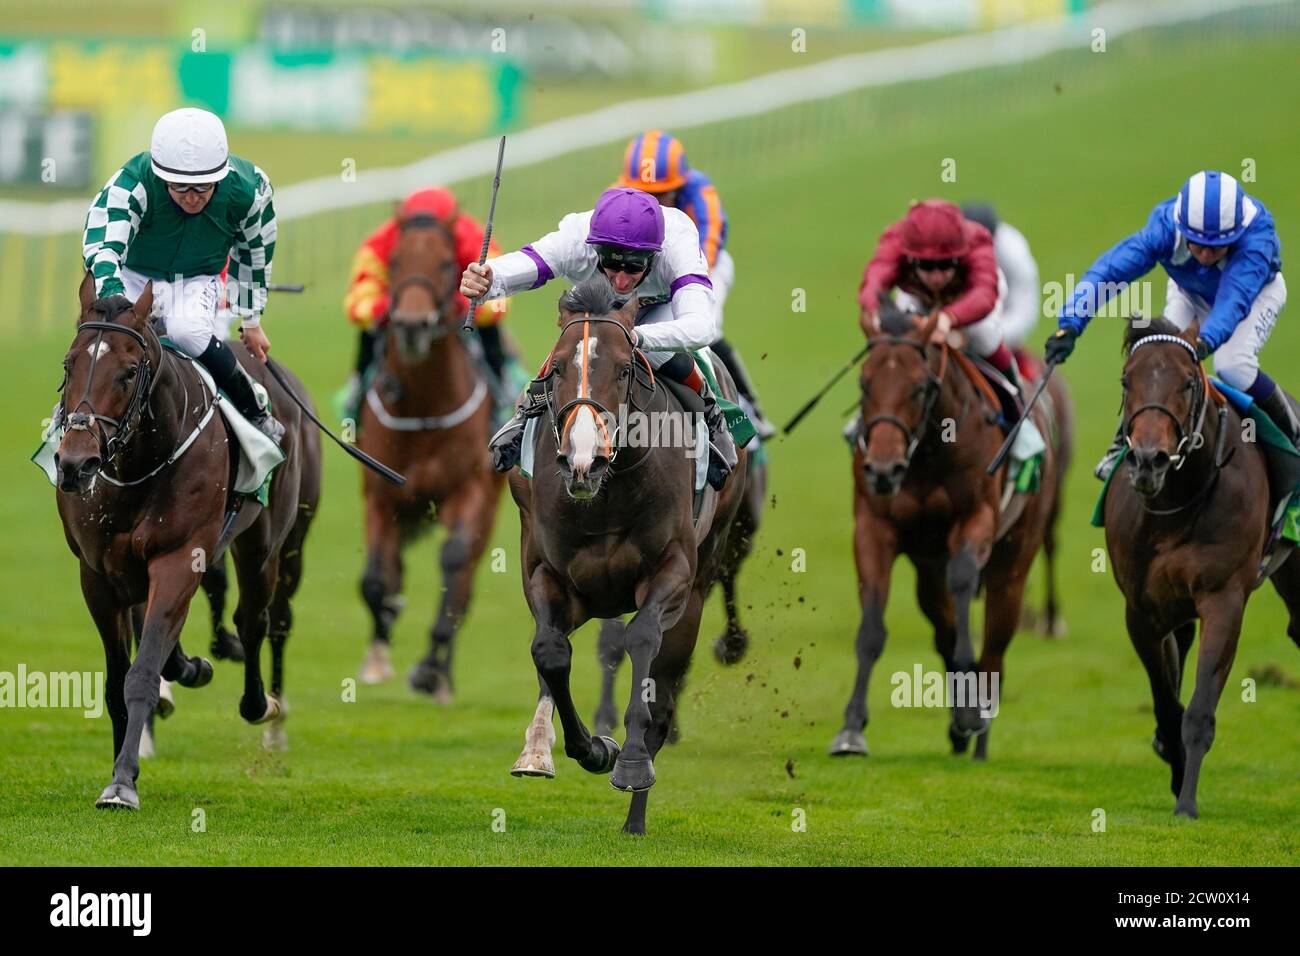 Supremacy ridden by jockey Adam Kirby (centre) wins The Juddmonte Middle Park Stakes during day three of The Cambridgeshire Meeting at Newmarket Racecourse. Stock Photo